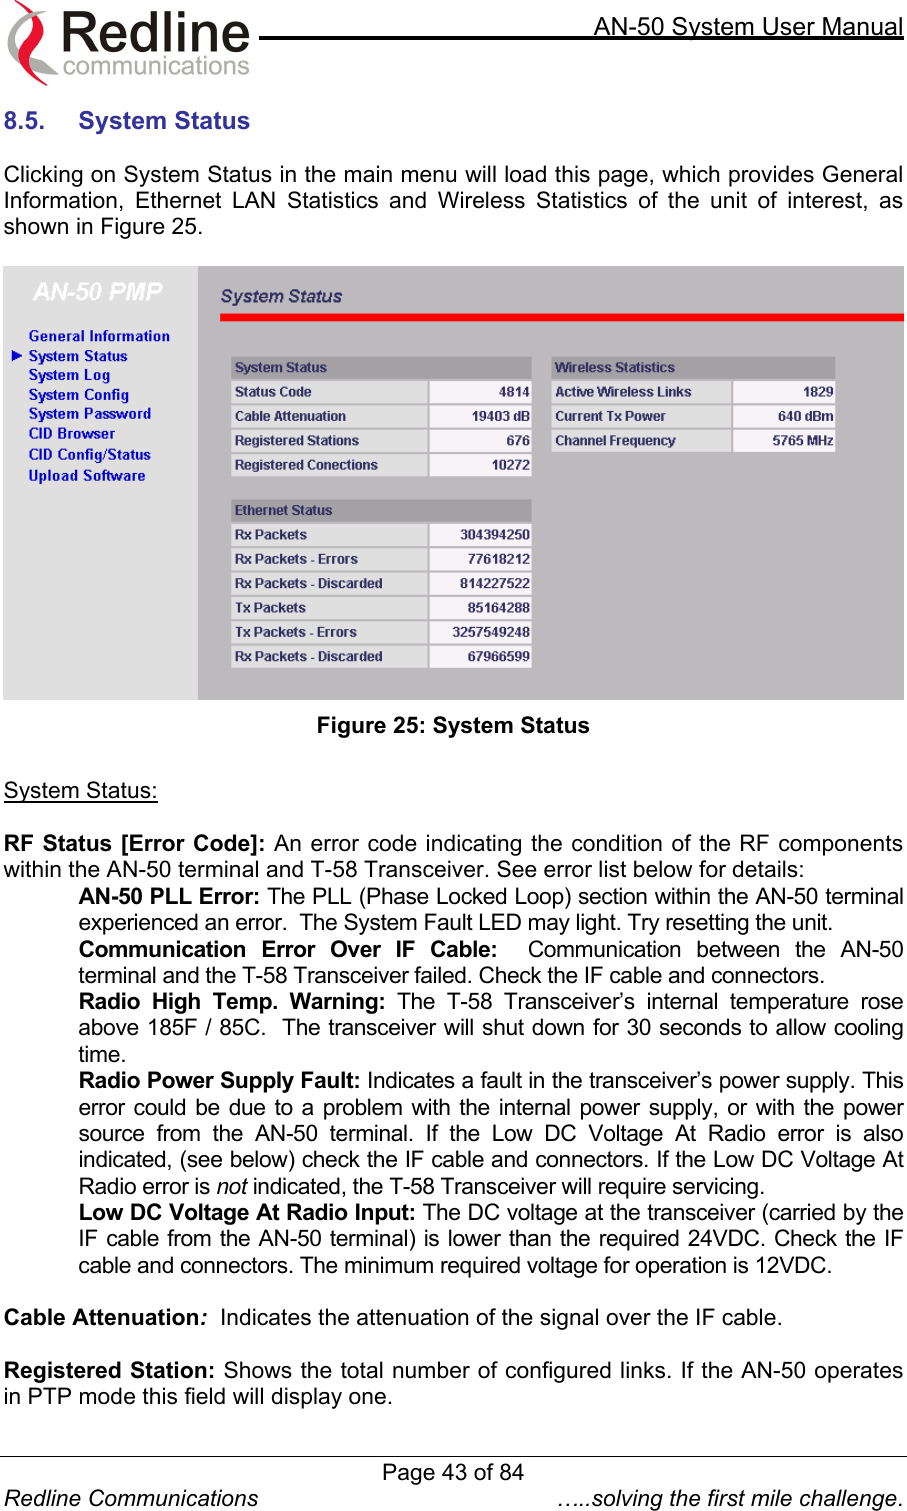     AN-50 System User Manual  Redline Communications  …..solving the first mile challenge. 8.5.  System Status   Clicking on System Status in the main menu will load this page, which provides General Information, Ethernet LAN Statistics and Wireless Statistics of the unit of interest, as shown in Figure 25.   Figure 25: System Status  System Status:  RF Status [Error Code]: An error code indicating the condition of the RF components within the AN-50 terminal and T-58 Transceiver. See error list below for details: AN-50 PLL Error: The PLL (Phase Locked Loop) section within the AN-50 terminal experienced an error.  The System Fault LED may light. Try resetting the unit. Communication Error Over IF Cable:  Communication between the AN-50 terminal and the T-58 Transceiver failed. Check the IF cable and connectors. Radio High Temp. Warning: The T-58 Transceiver’s internal temperature rose above 185F / 85C.  The transceiver will shut down for 30 seconds to allow cooling time. Radio Power Supply Fault: Indicates a fault in the transceiver’s power supply. This error could be due to a problem with the internal power supply, or with the power source from the AN-50 terminal. If the Low DC Voltage At Radio error is also indicated, (see below) check the IF cable and connectors. If the Low DC Voltage At Radio error is not indicated, the T-58 Transceiver will require servicing. Low DC Voltage At Radio Input: The DC voltage at the transceiver (carried by the IF cable from the AN-50 terminal) is lower than the required 24VDC. Check the IF cable and connectors. The minimum required voltage for operation is 12VDC.  Cable Attenuation:  Indicates the attenuation of the signal over the IF cable.  Registered Station: Shows the total number of configured links. If the AN-50 operates in PTP mode this field will display one.  Page 43 of 84